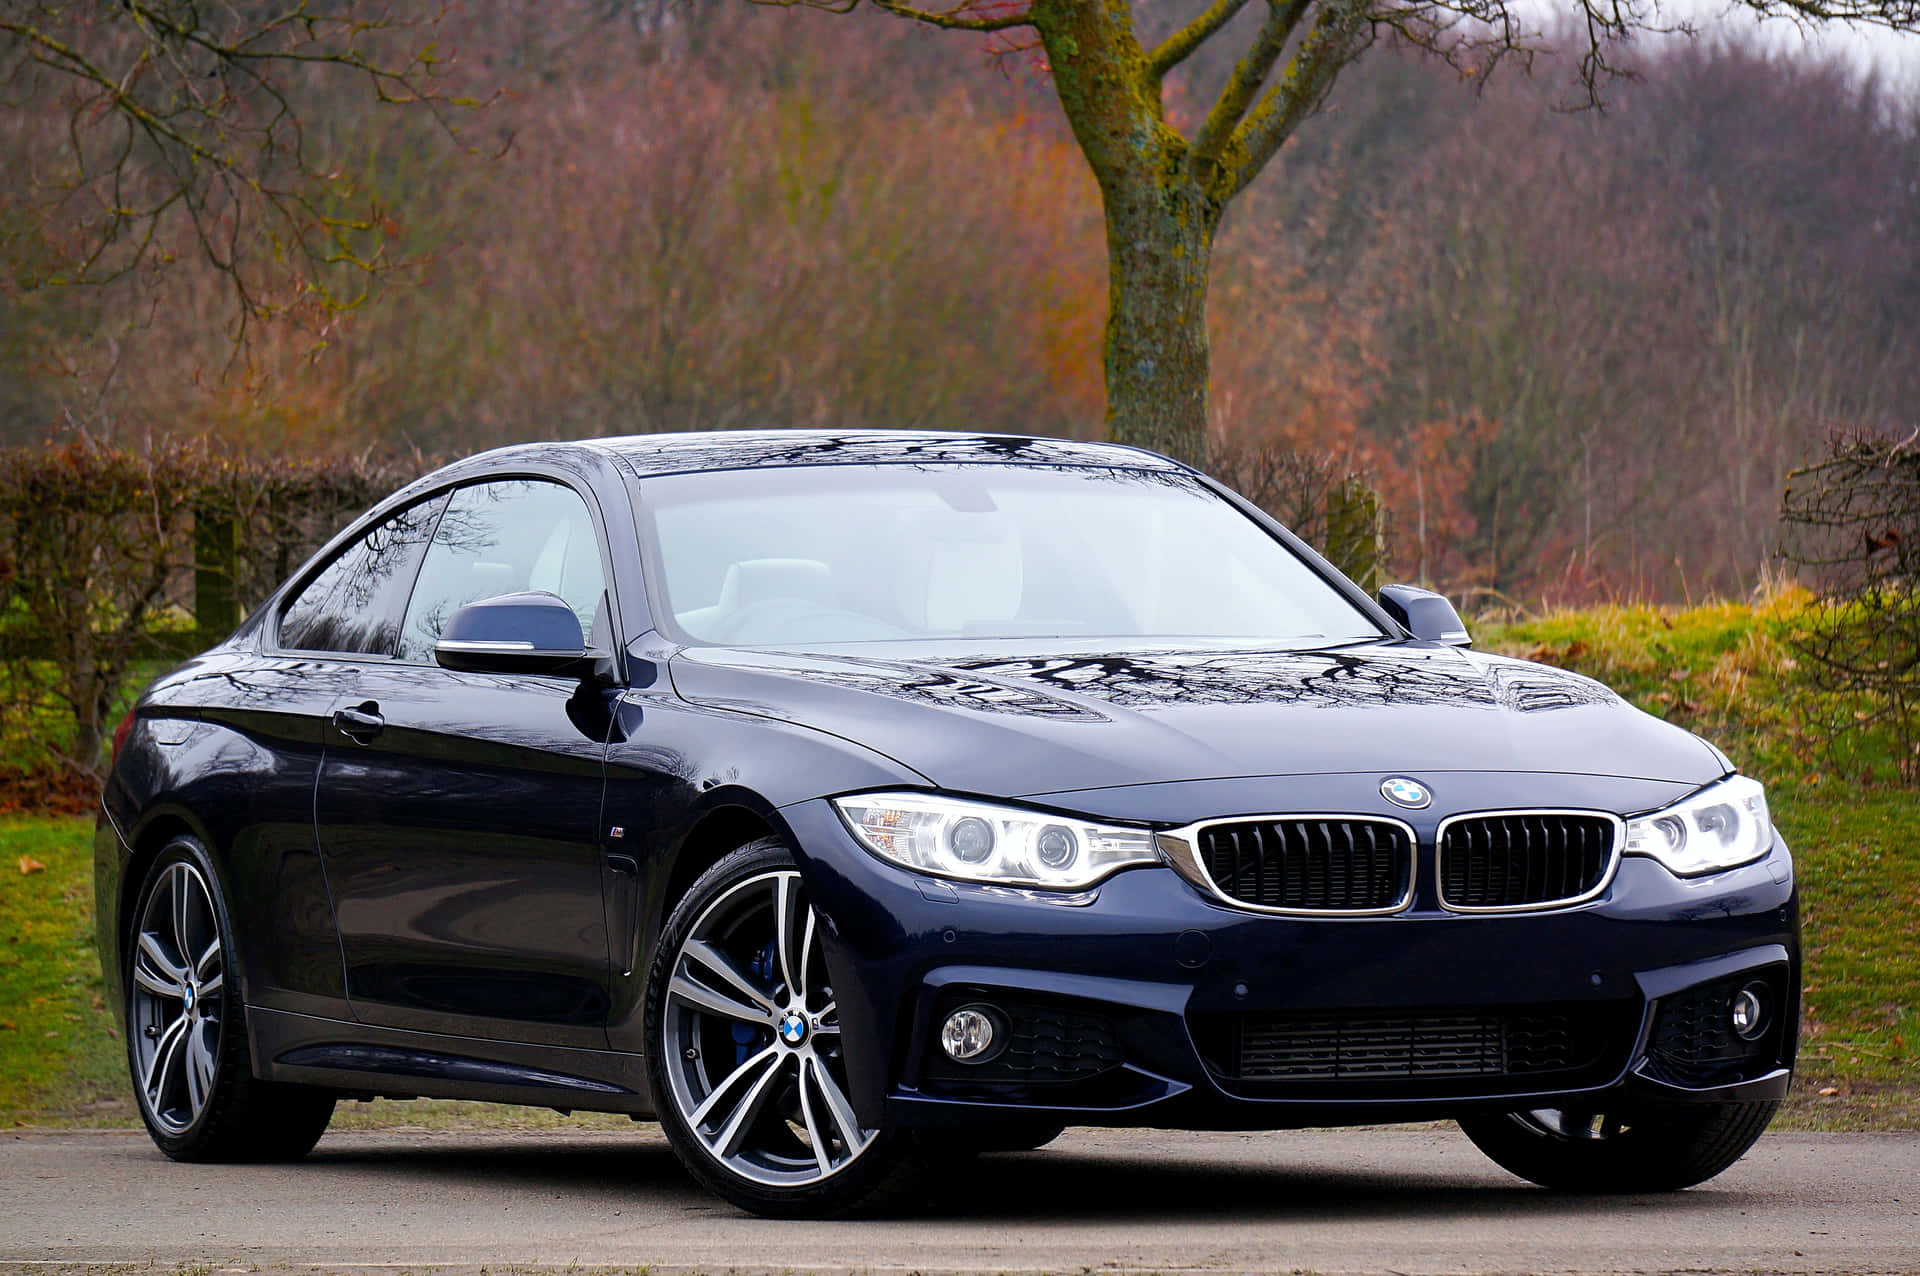 Powerful and Stylish - The BMW 440i Wallpaper